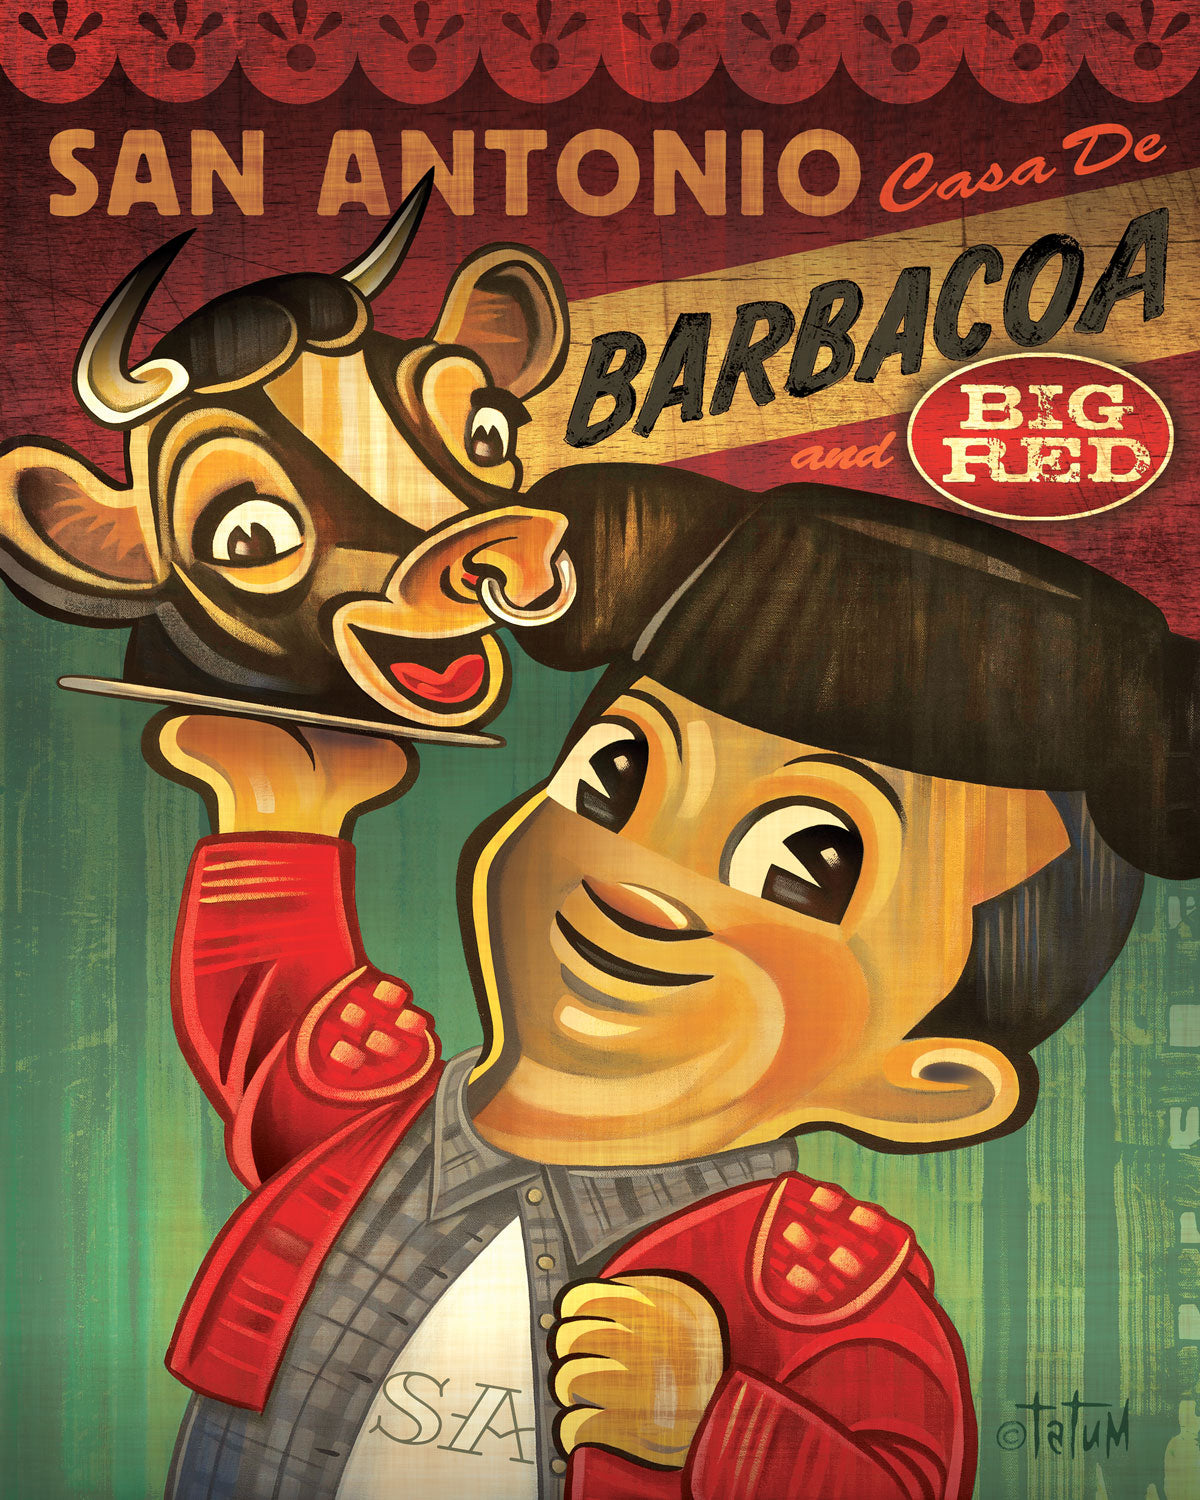 Bobs burger boy look alike matador bob holds a platter with a happy cow head. the words San Antonio Casa de Barbacoa and Big Red logo at the top of the print with a red and green background. The character wears a red matador jacket and a black matador hat and a grey plaid shirt with a white t-shirt that has SA on the front. 8x10 inch print, 11x14 inch print, 16x20 inch print and 18x24 inch print 